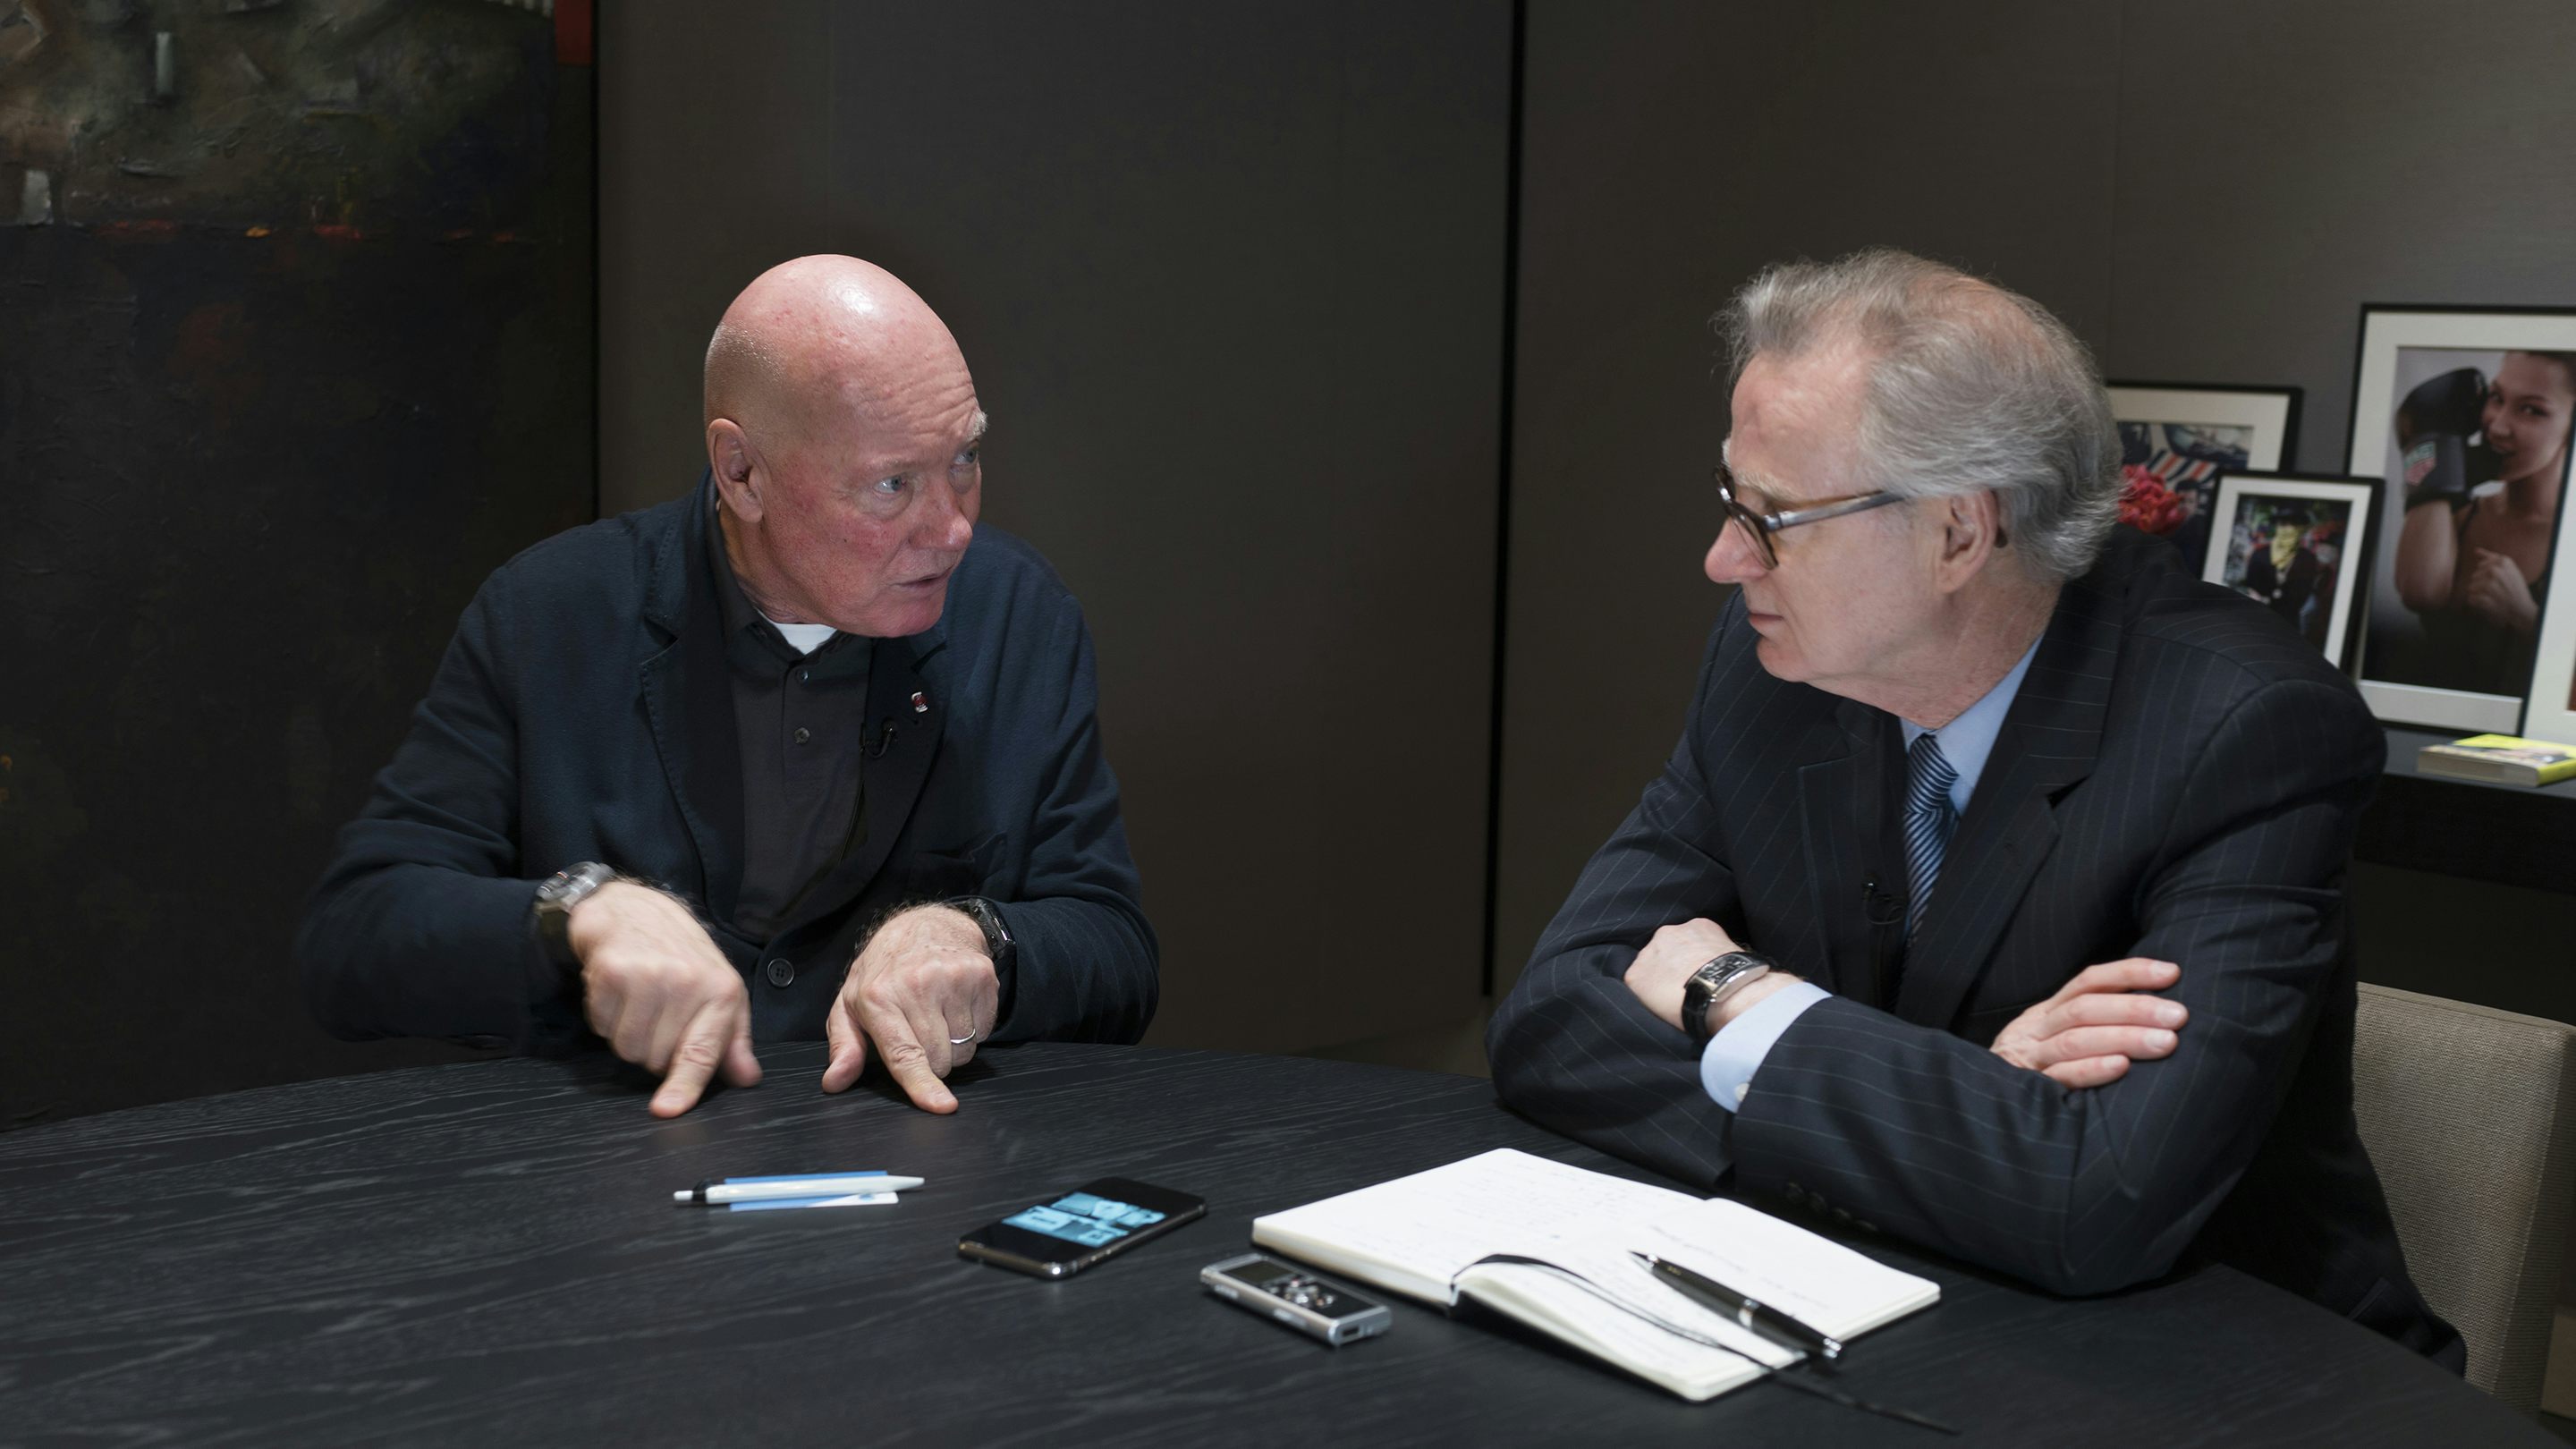 Jean-Claude Biver on Baselworld 2018 and the Digital Era